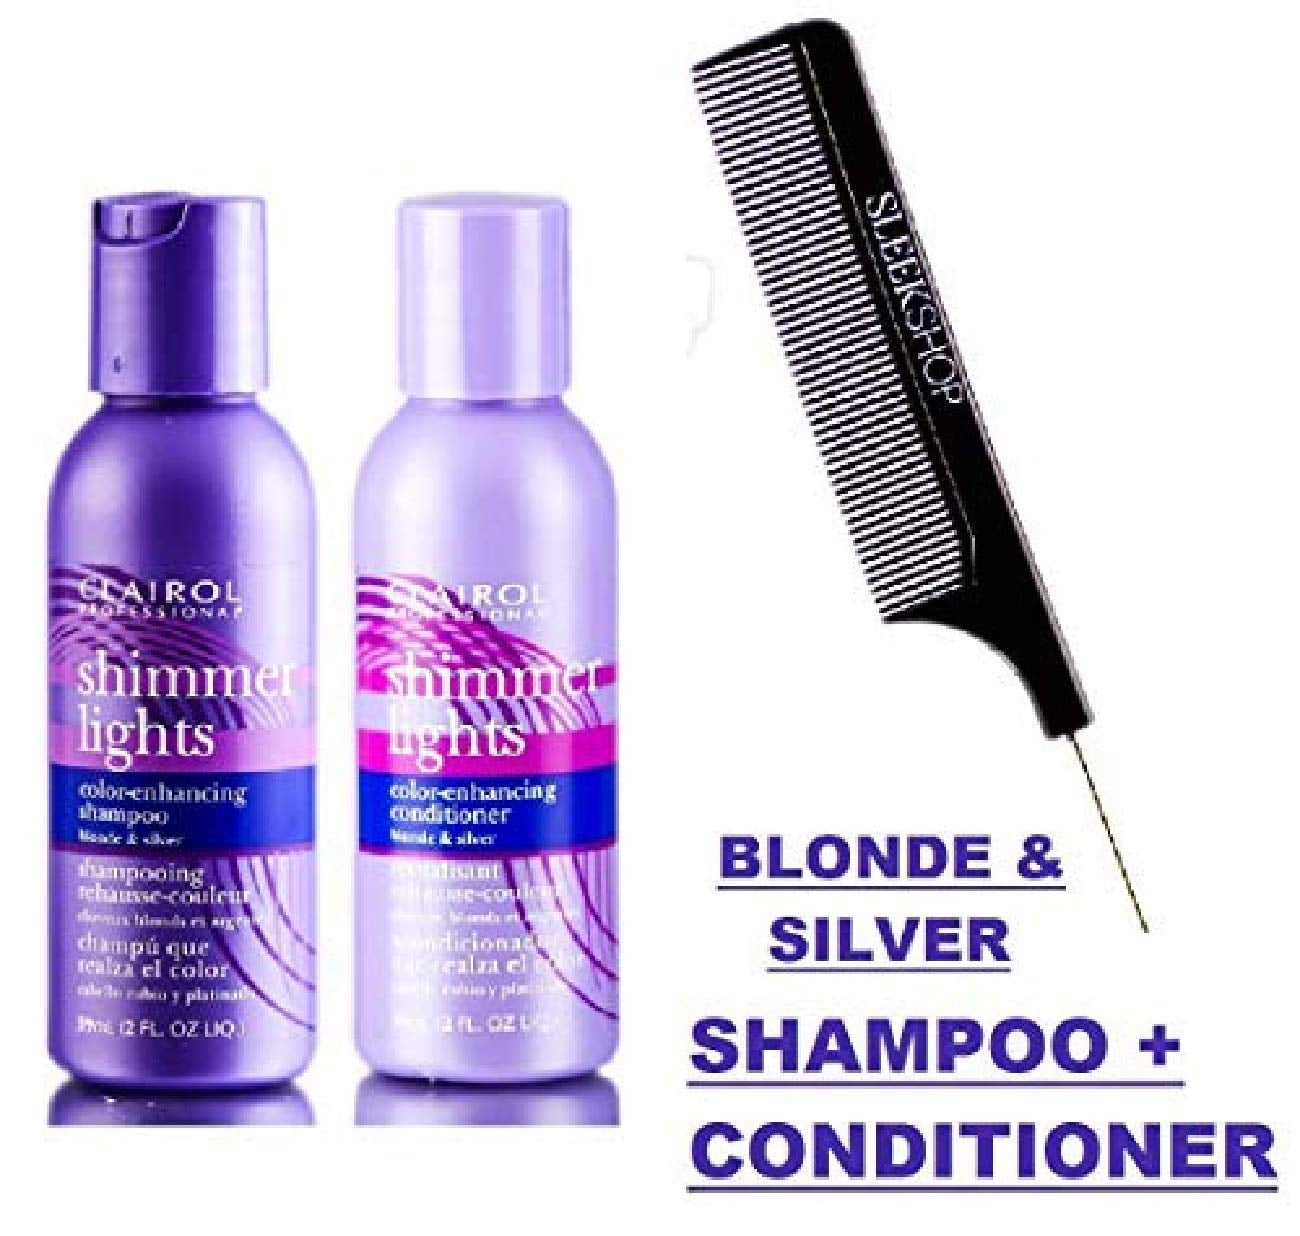 Luksus Måge At adskille Clairol SHIMMER LIGHTS Shampoo & Conditioner DUO, BLONDE & SILVER, Purple  Violet To Tone Down Brassiness, Brightens & Refreshes Highlighted (w/Comb)  Remove Yellow (31.5 oz LARGE LITER DUO SET KIT) - Walmart.com